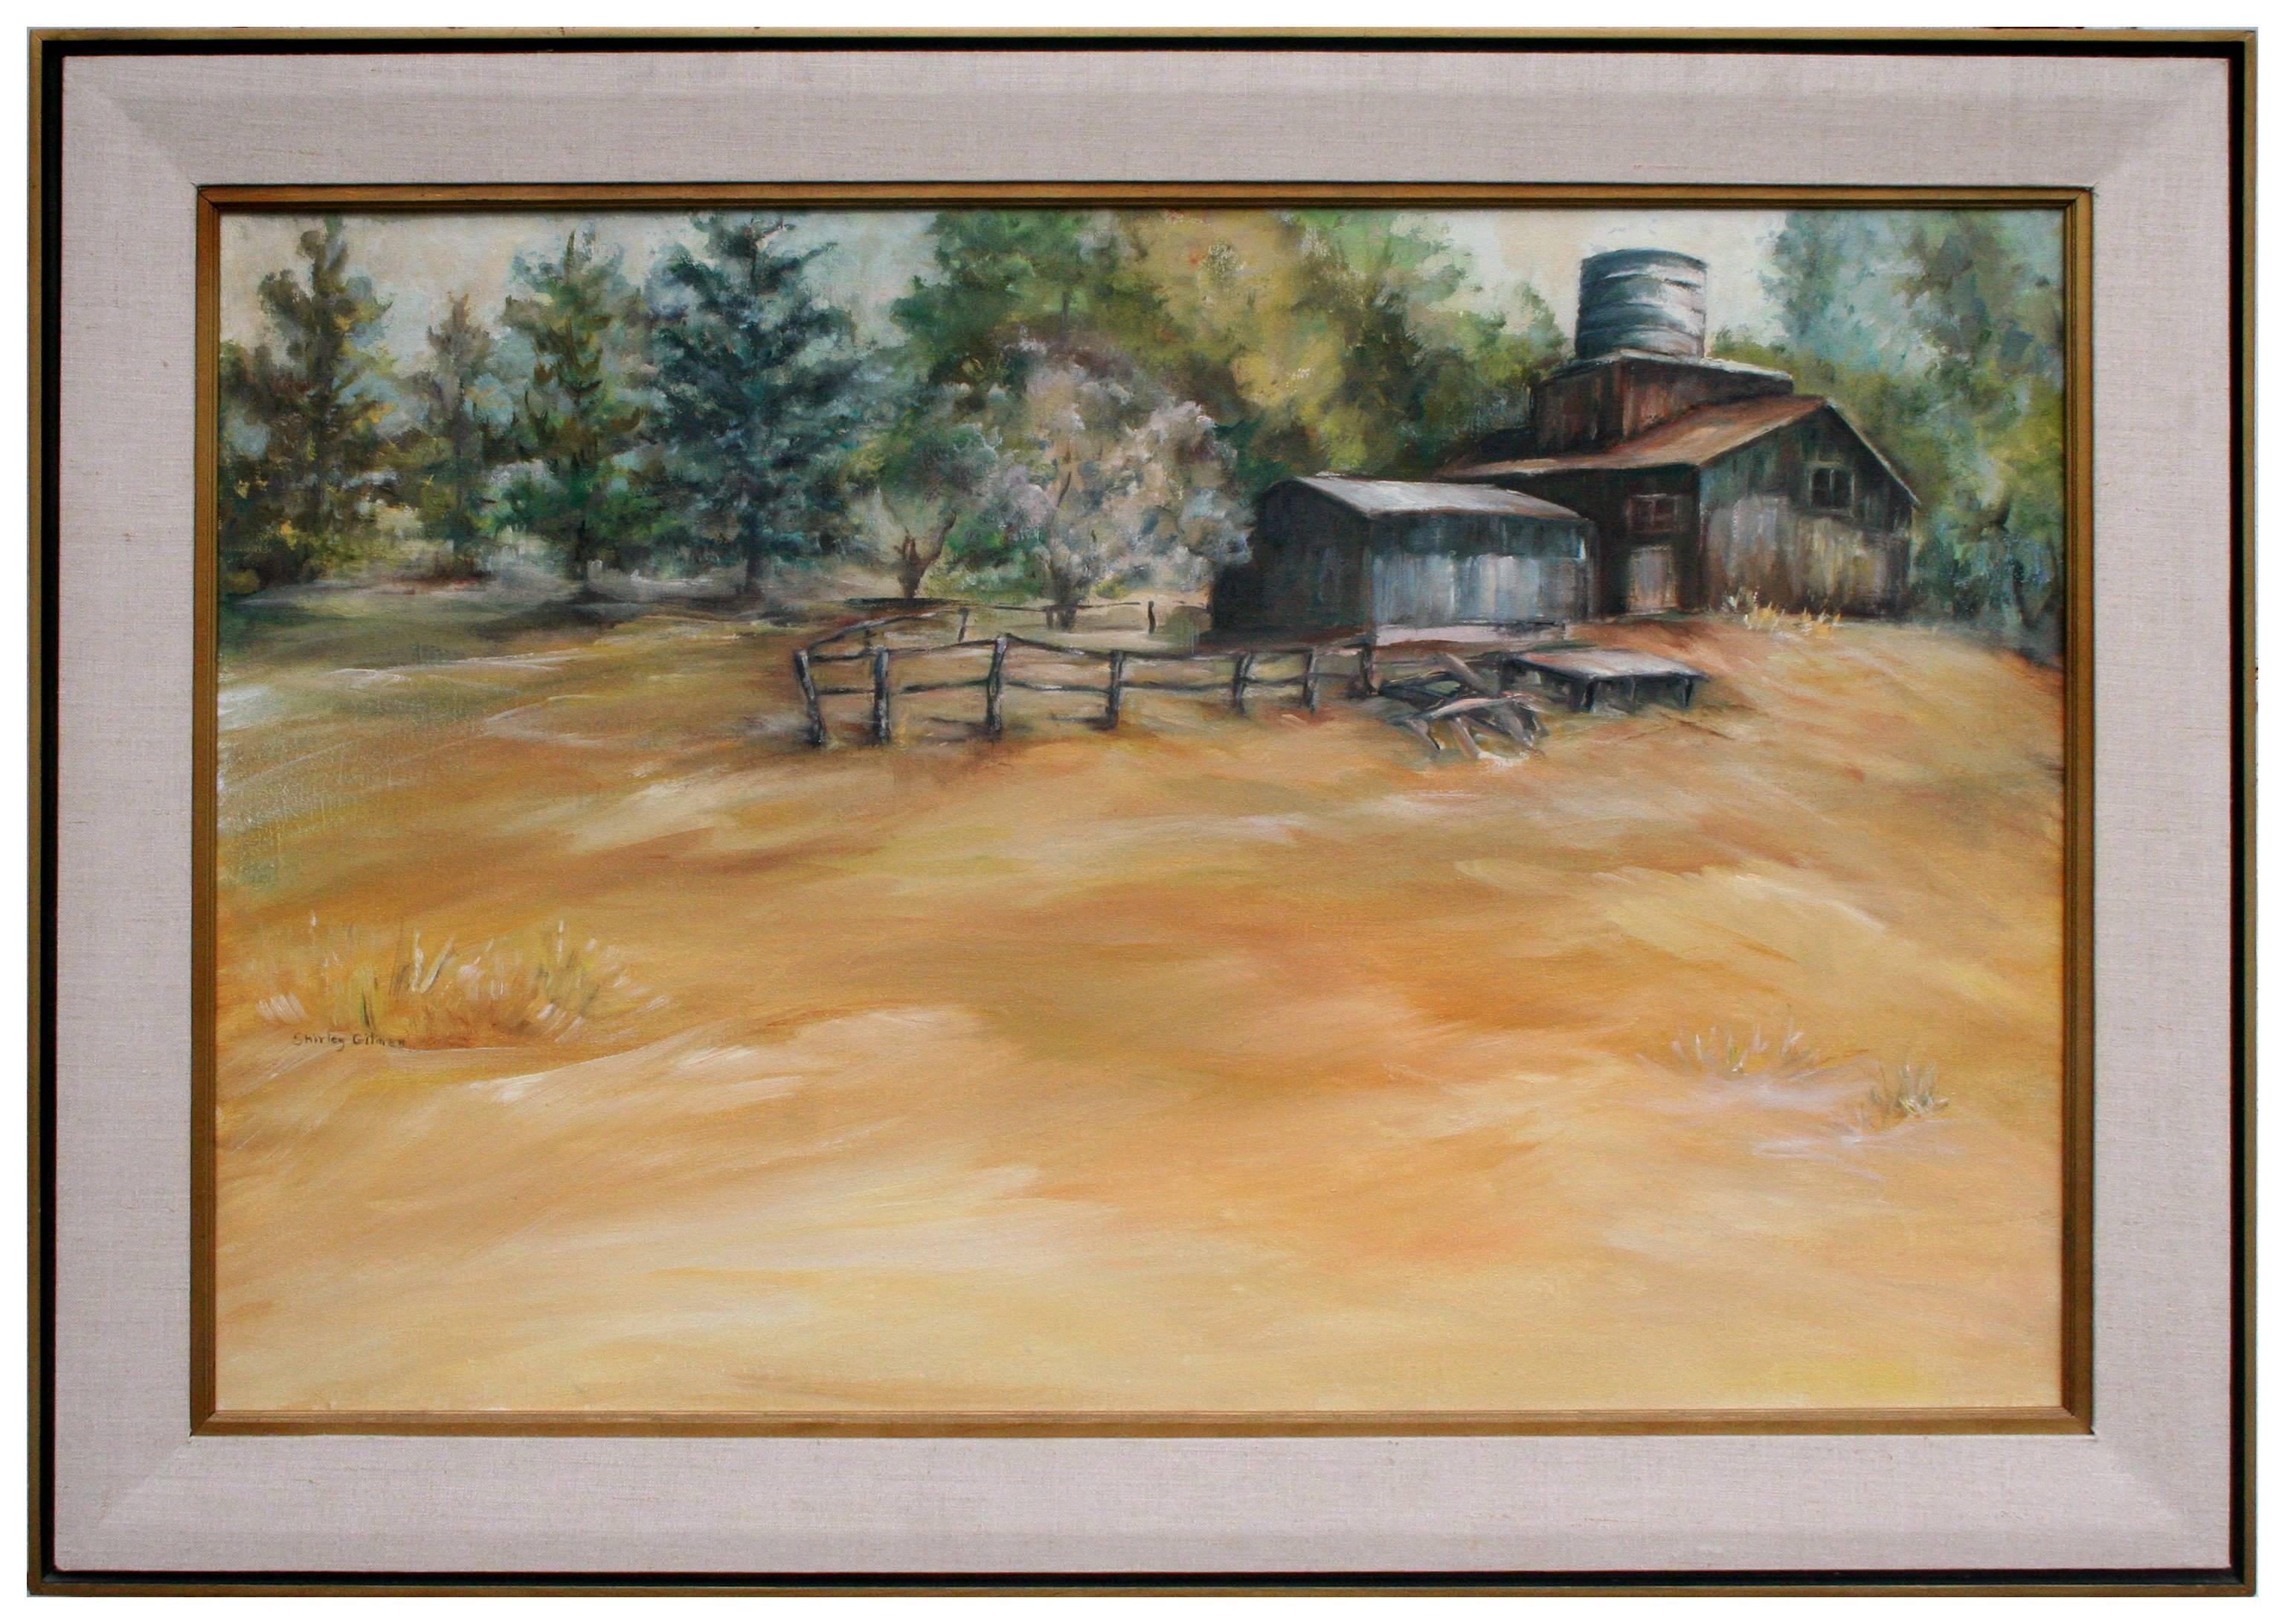 Shirley Gilman Landscape Painting - "Lazy Day in the Country" - Mid Century Pastoral Farm Landscape w Barn